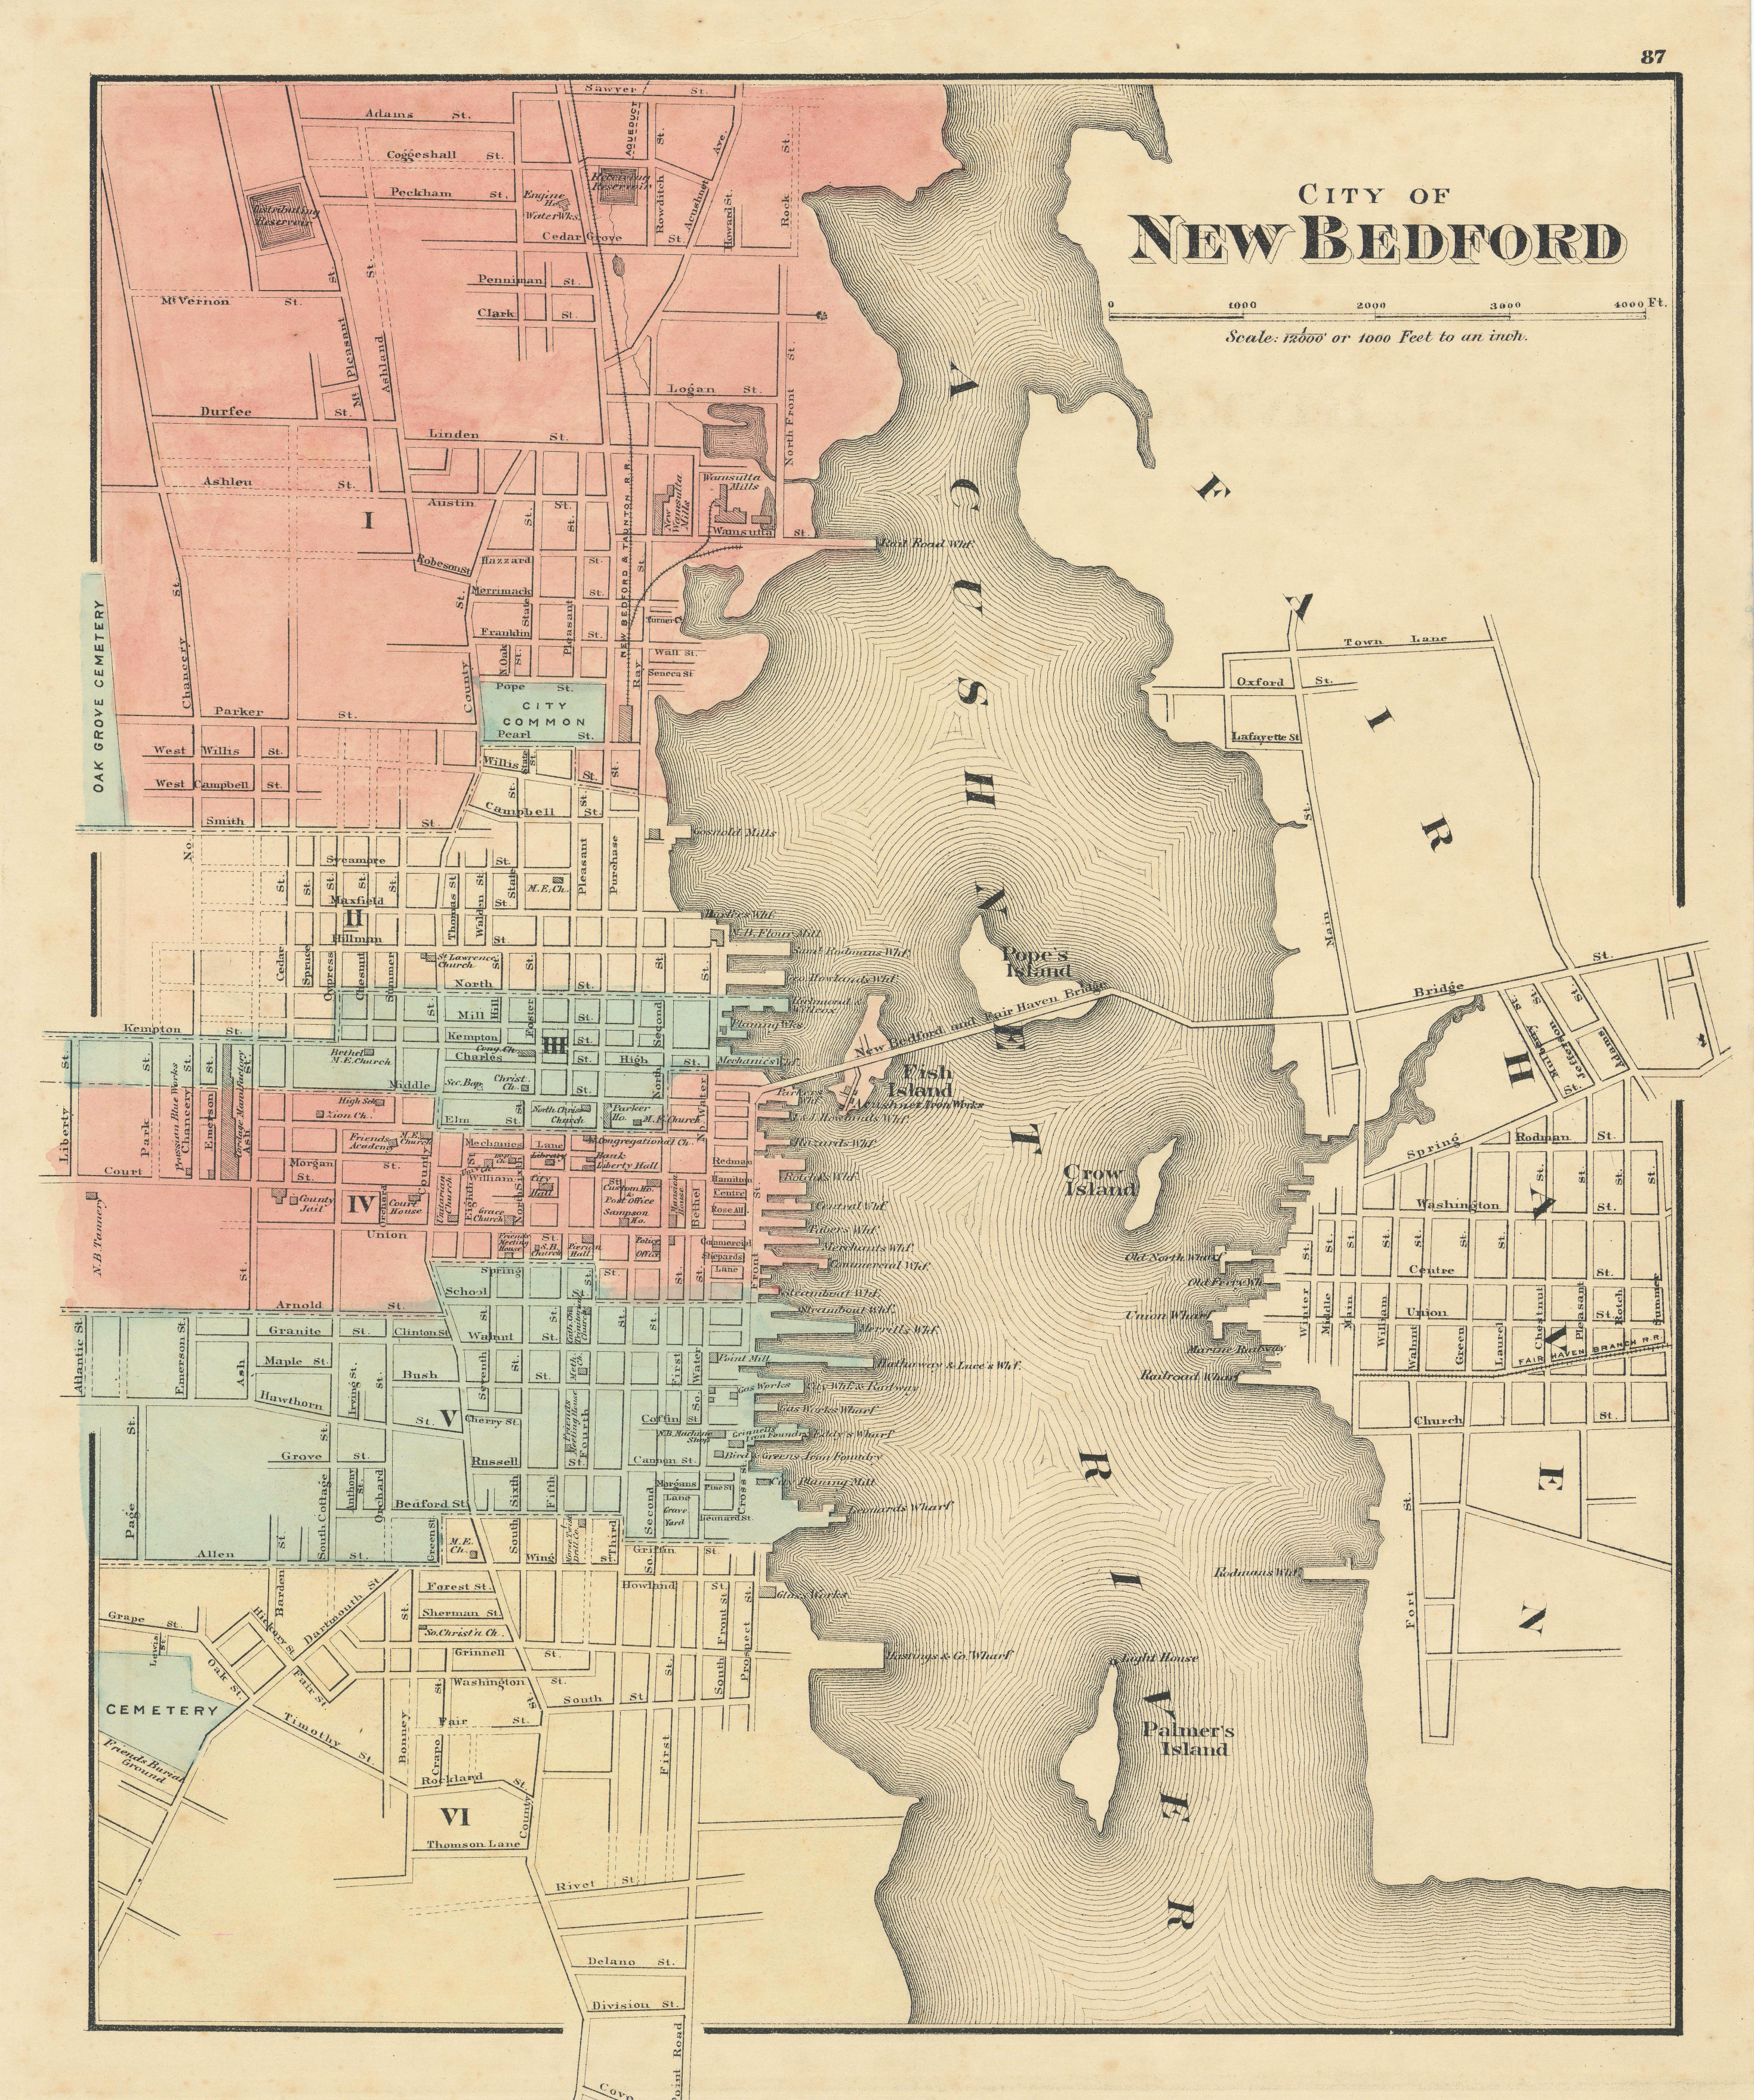 Associate Product City of New Bedford, Massachusetts. Town plan. WALLING & GRAY 1871 old map